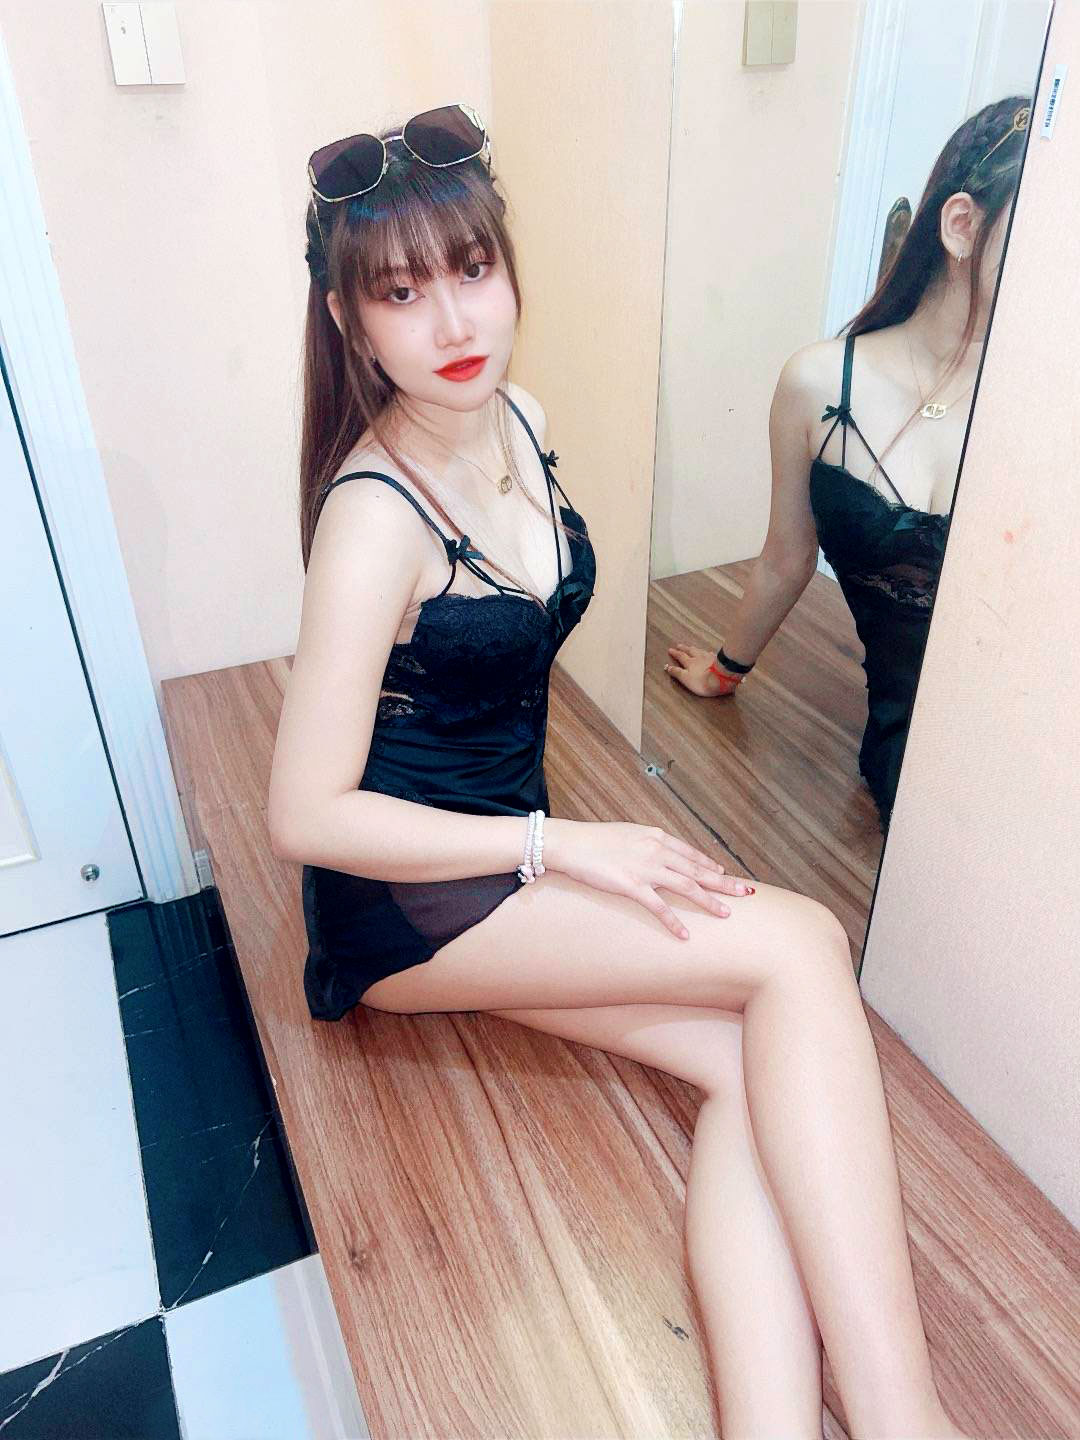 We provide sensual massage in Bangkok with full service and happy ending